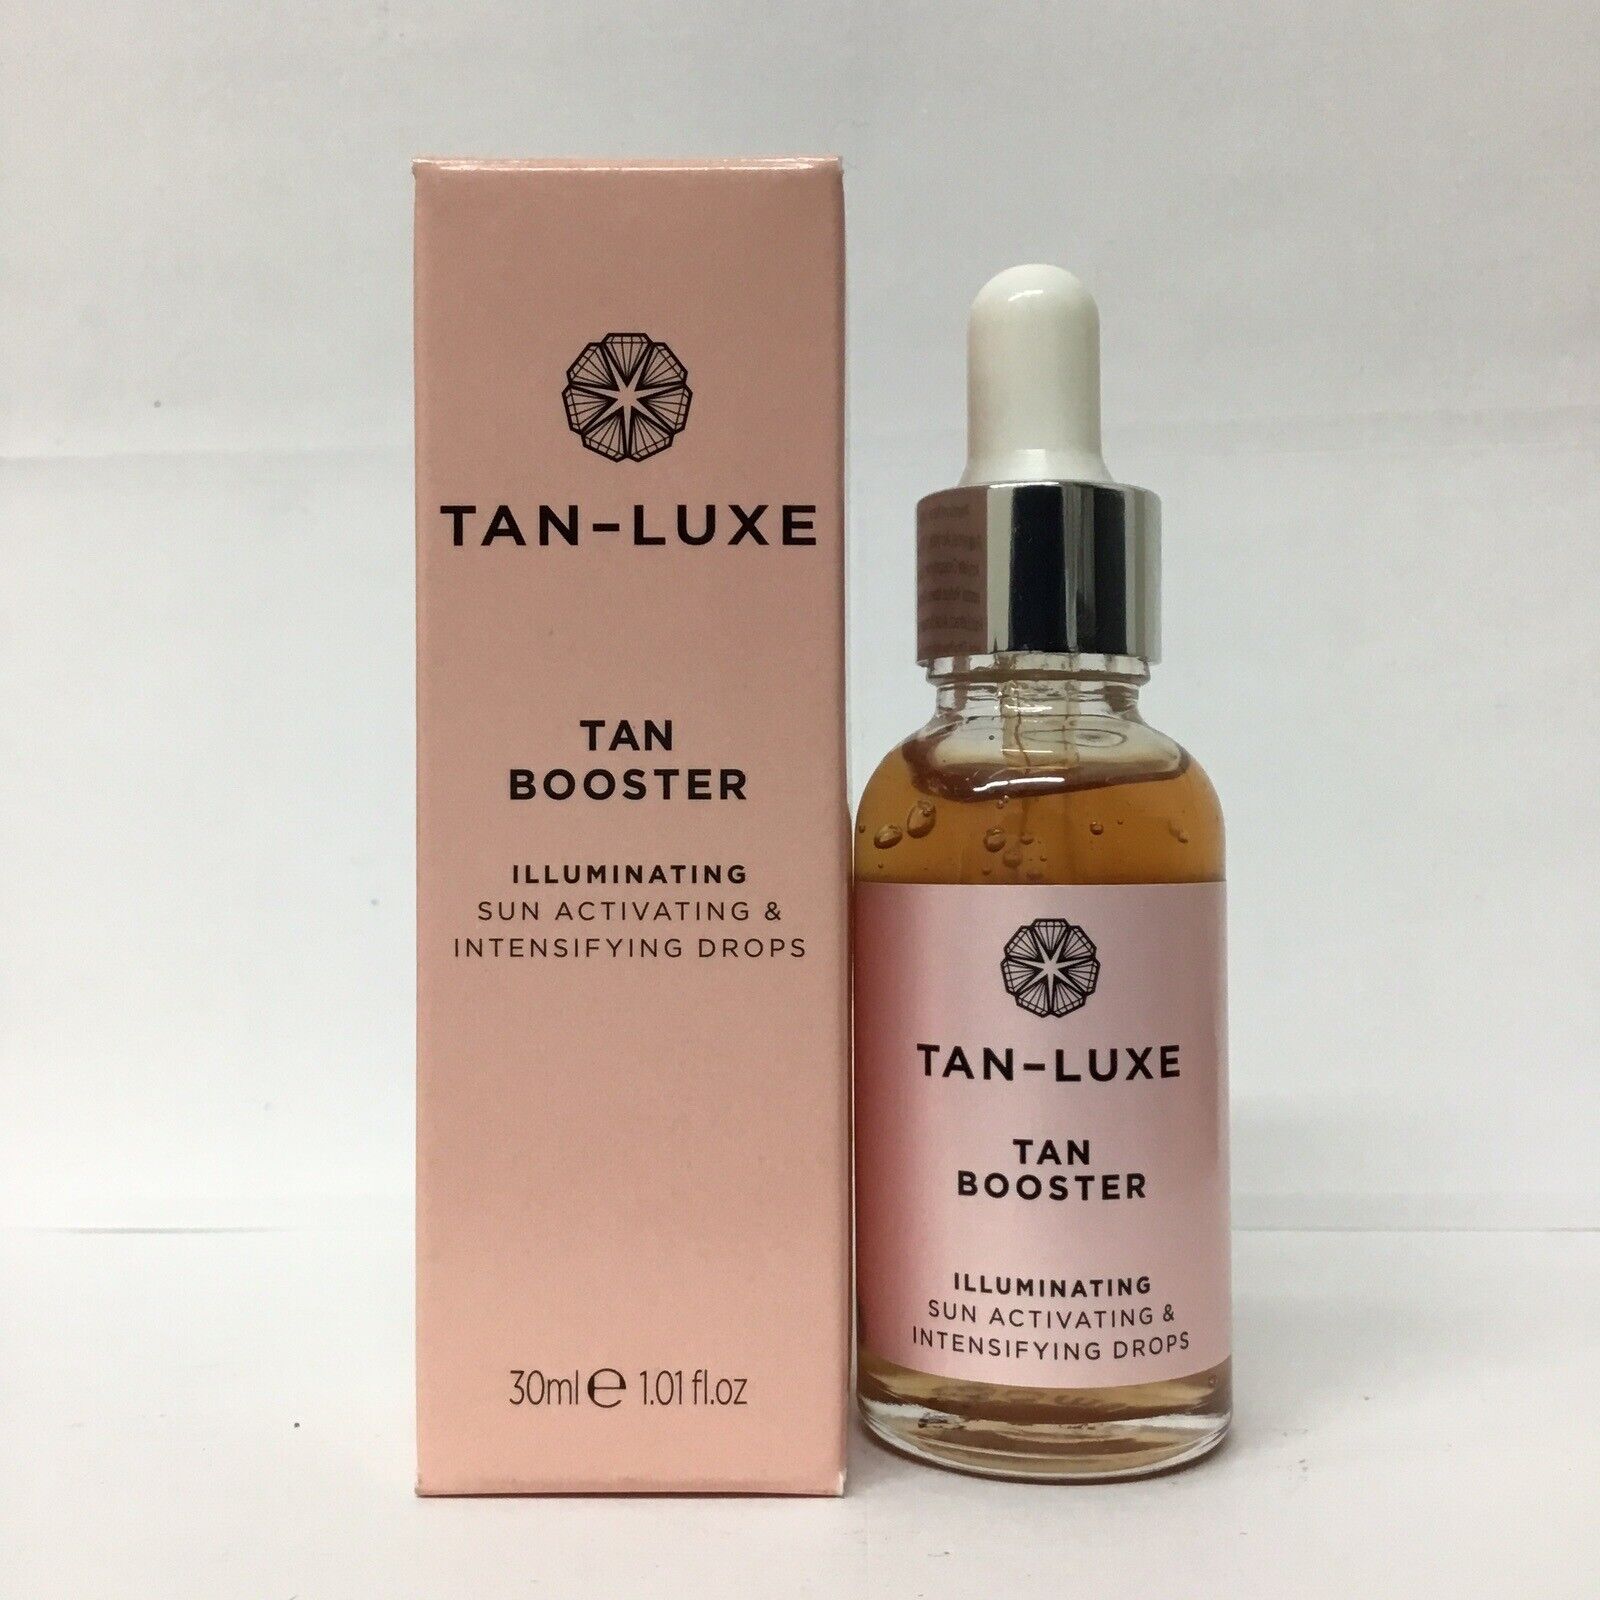 Tan-Luxe Tan Booster Illuminating Drops 1.01oz | As Pictured | New in box